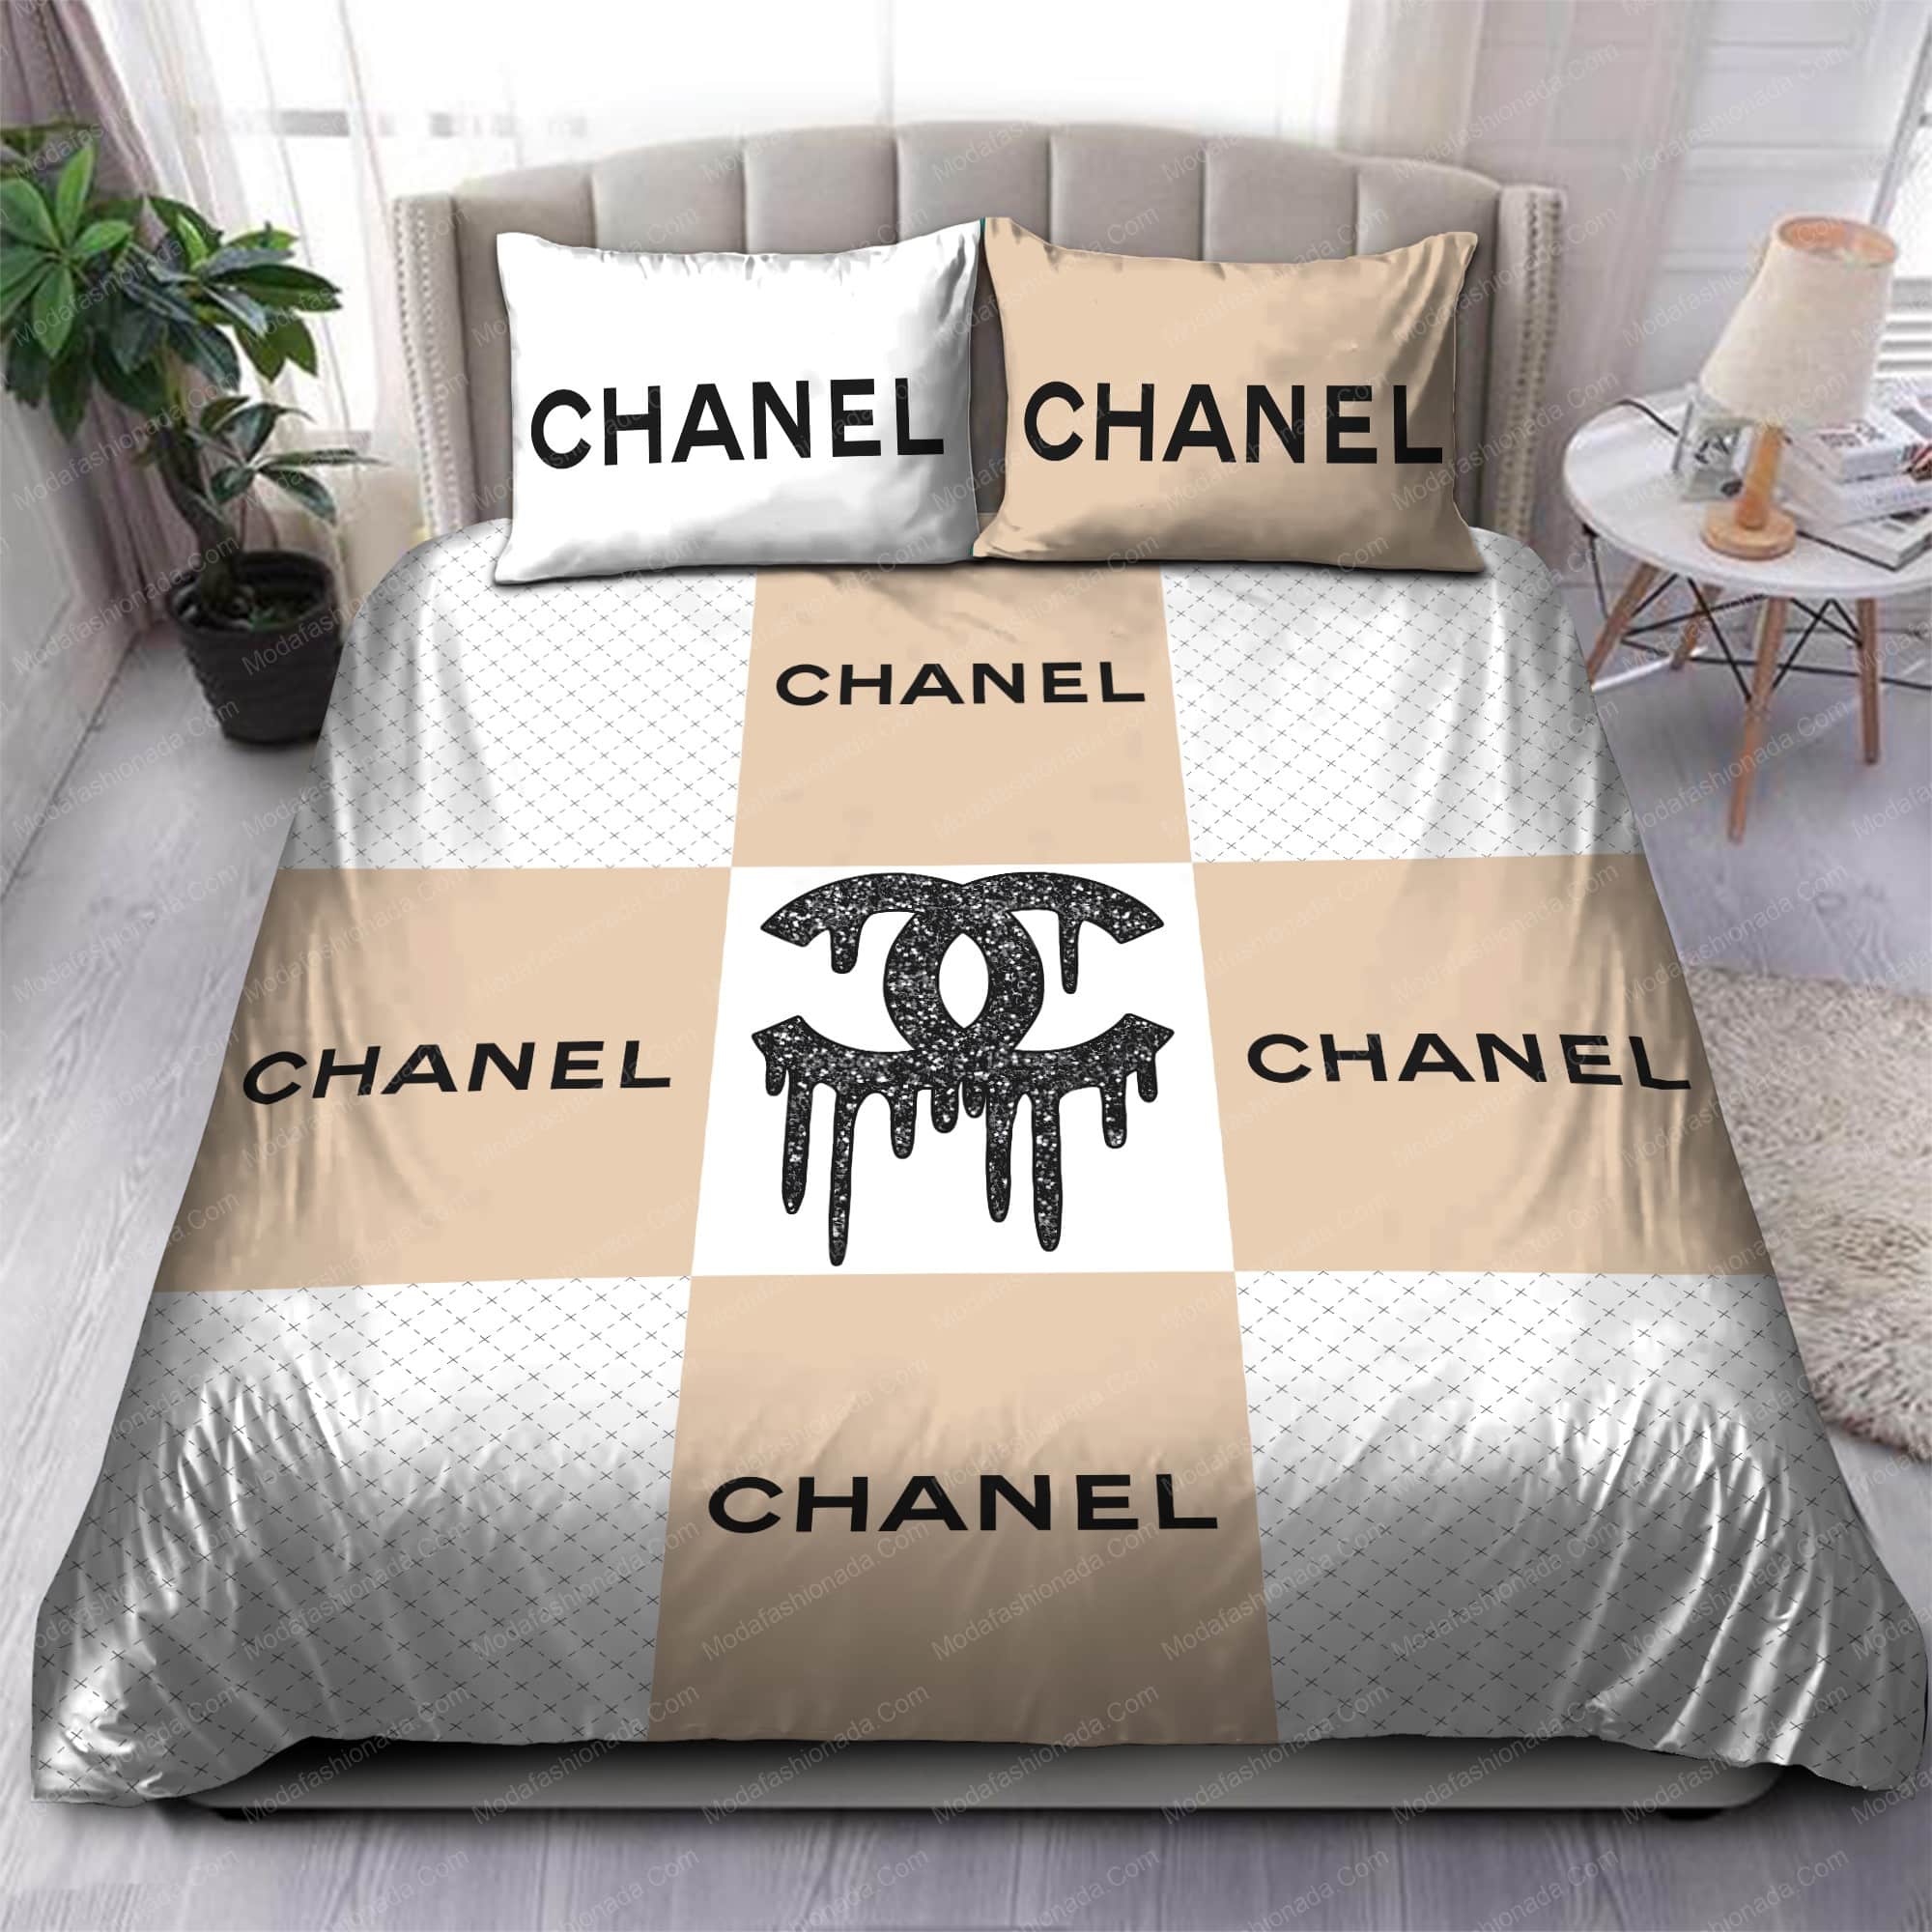 Buy Chanel Logo Bedding Sets Bed Sets With Twin, Full, Queen, King Size